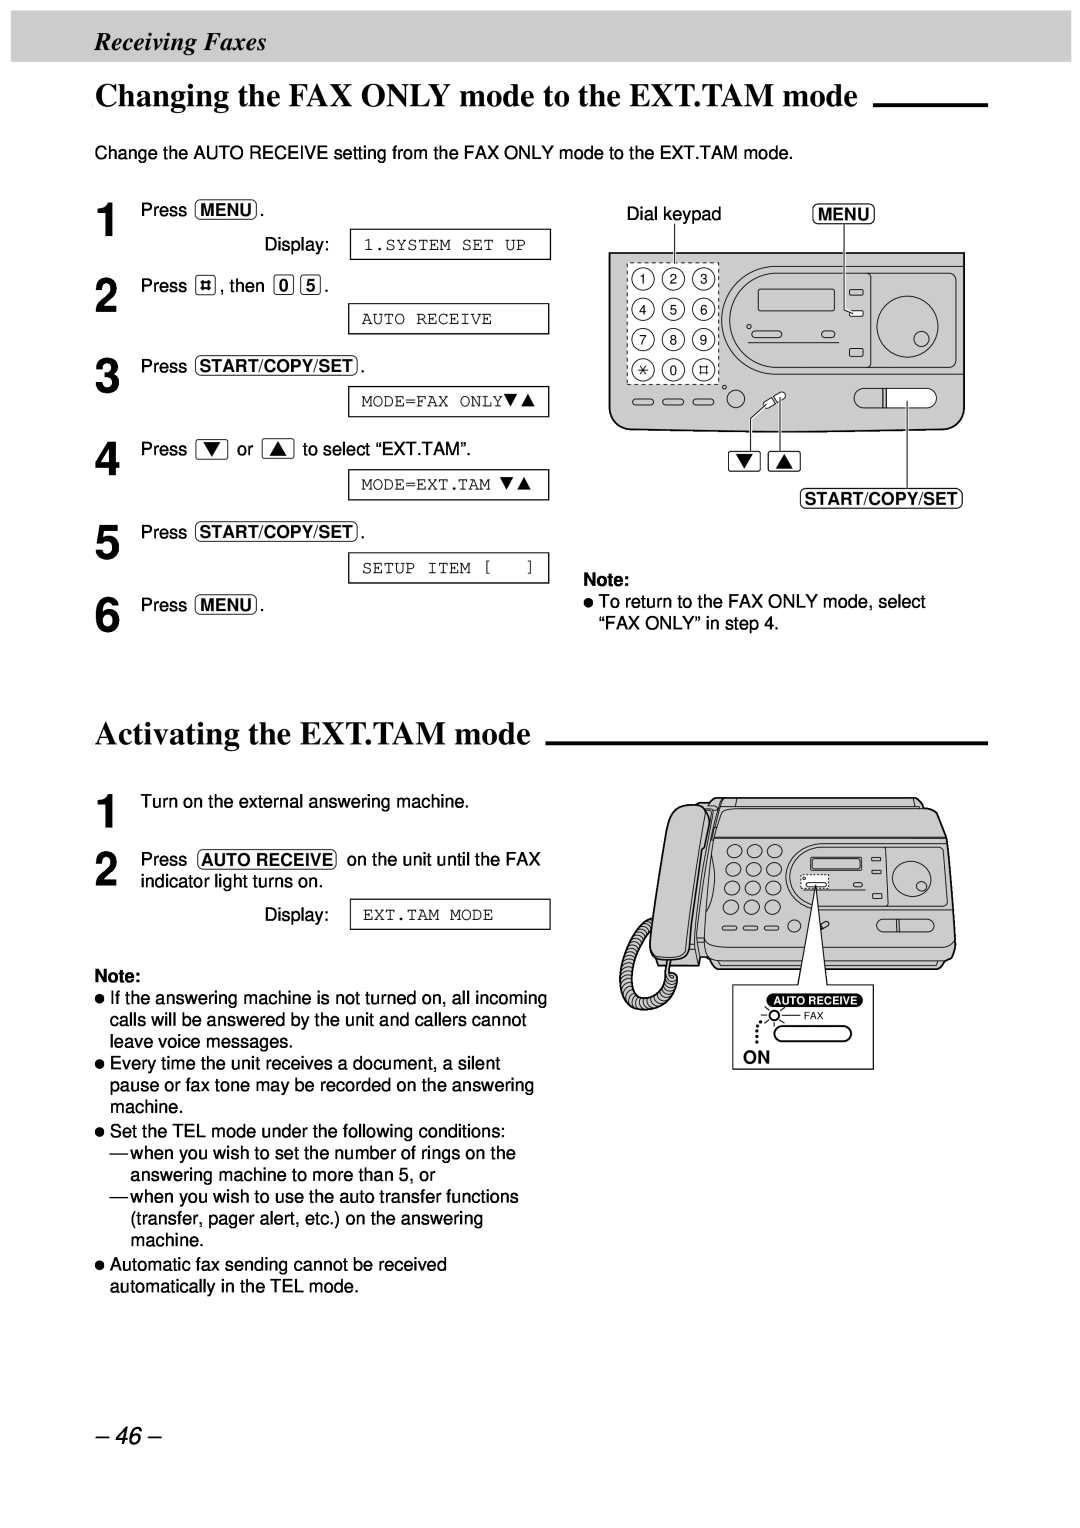 Panasonic KX-FT33HK Changing the FAX ONLY mode to the EXT.TAM mode, Activating the EXT.TAM mode, Receiving Faxes 